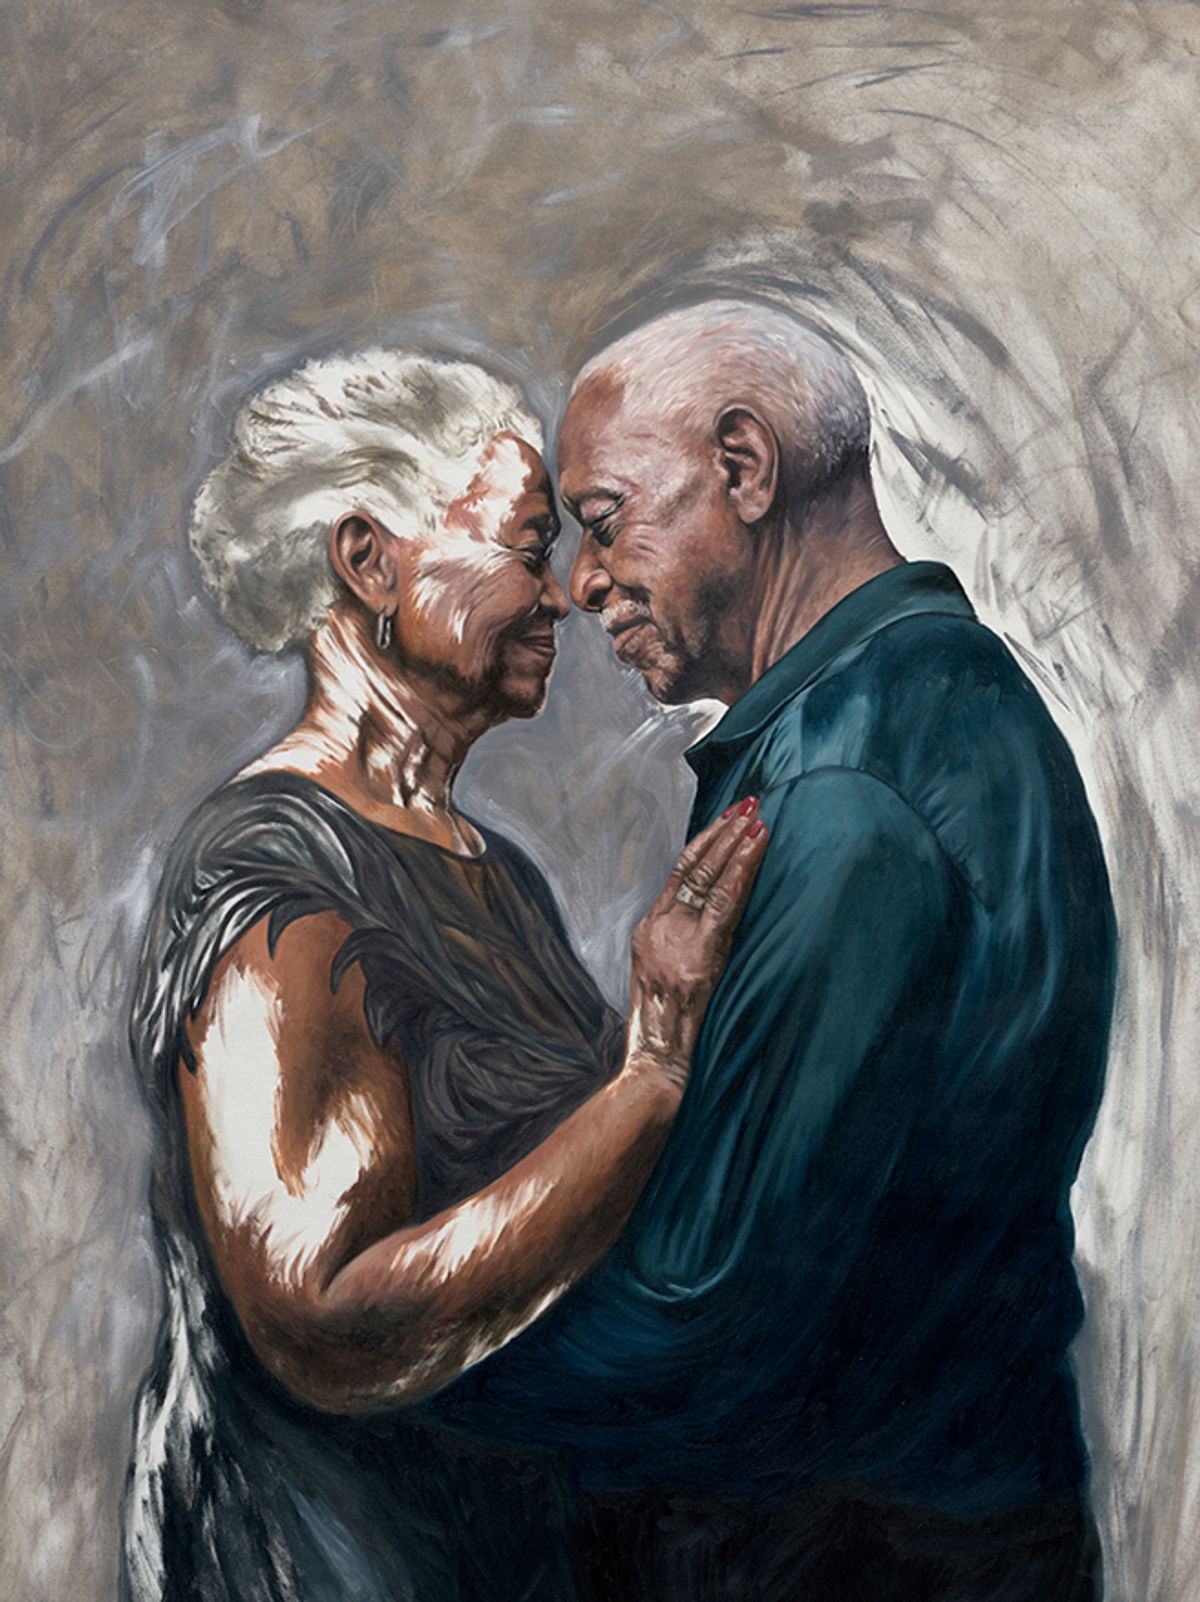 A Dance Partner (2023) is one of the portraits the Buffalo-based artist Julia Bottoms made after interviewing 14 May 2022 survivors and victims’ families © Buffalo Fine Arts Academy